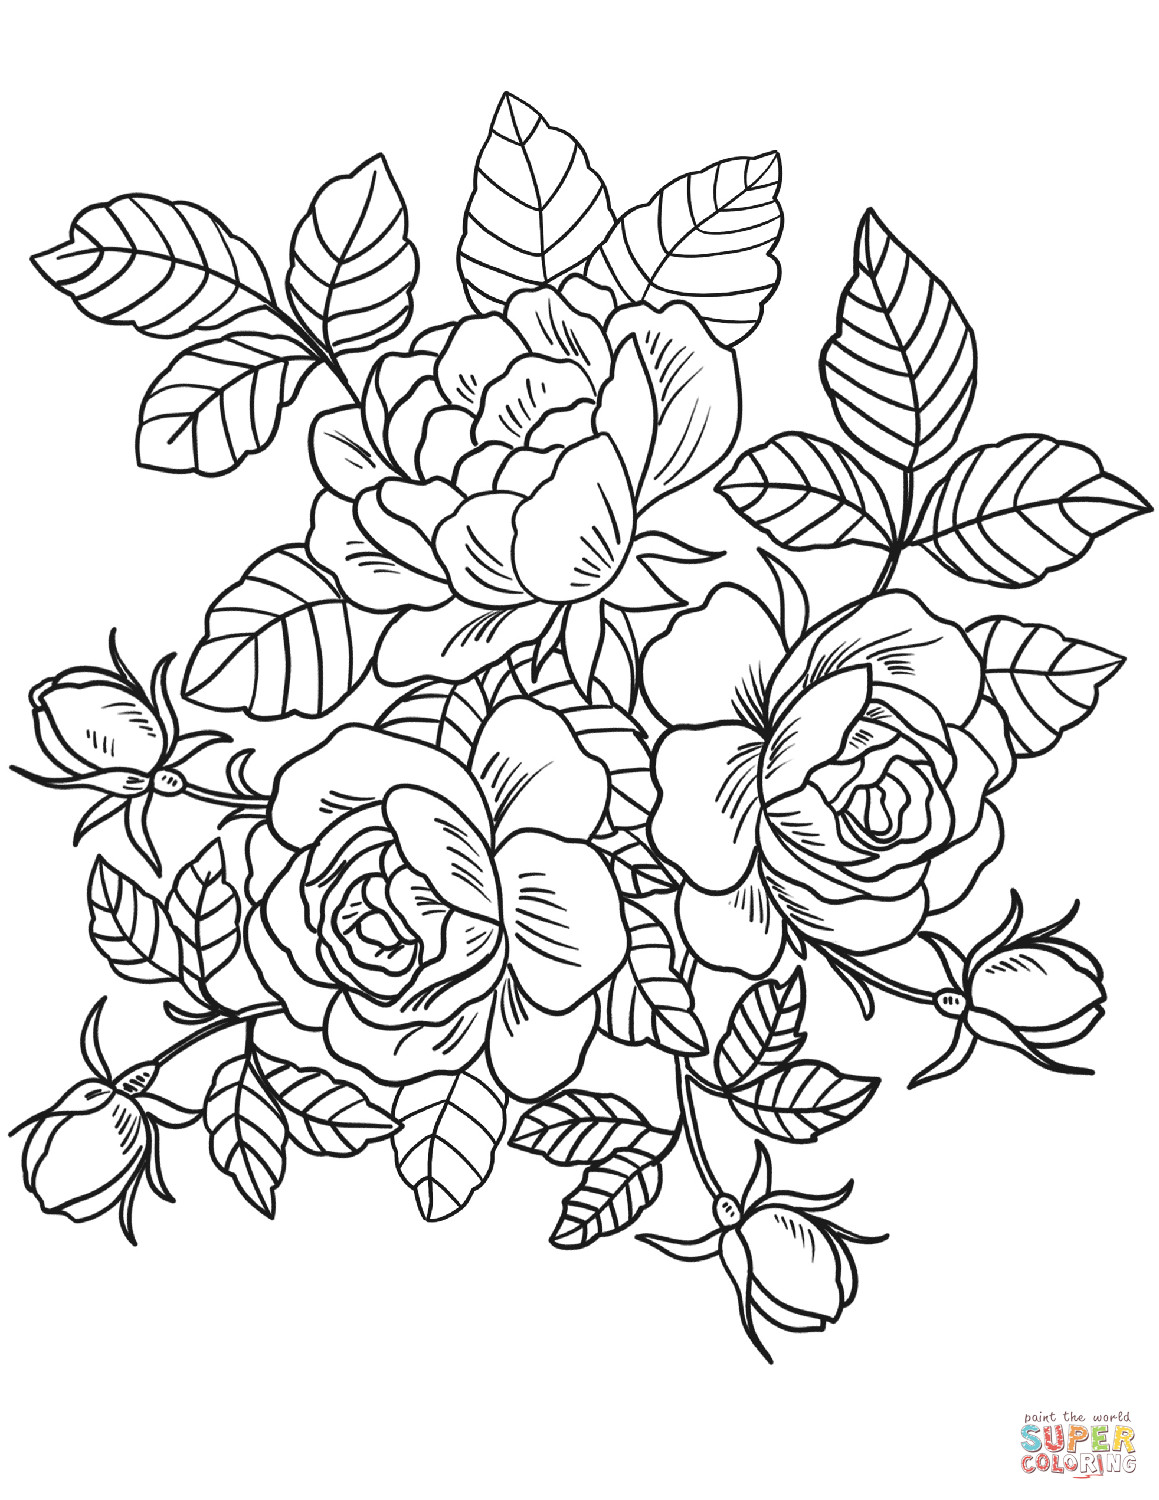 Roses Coloring Pages For Adults
 Roses Flowers coloring page